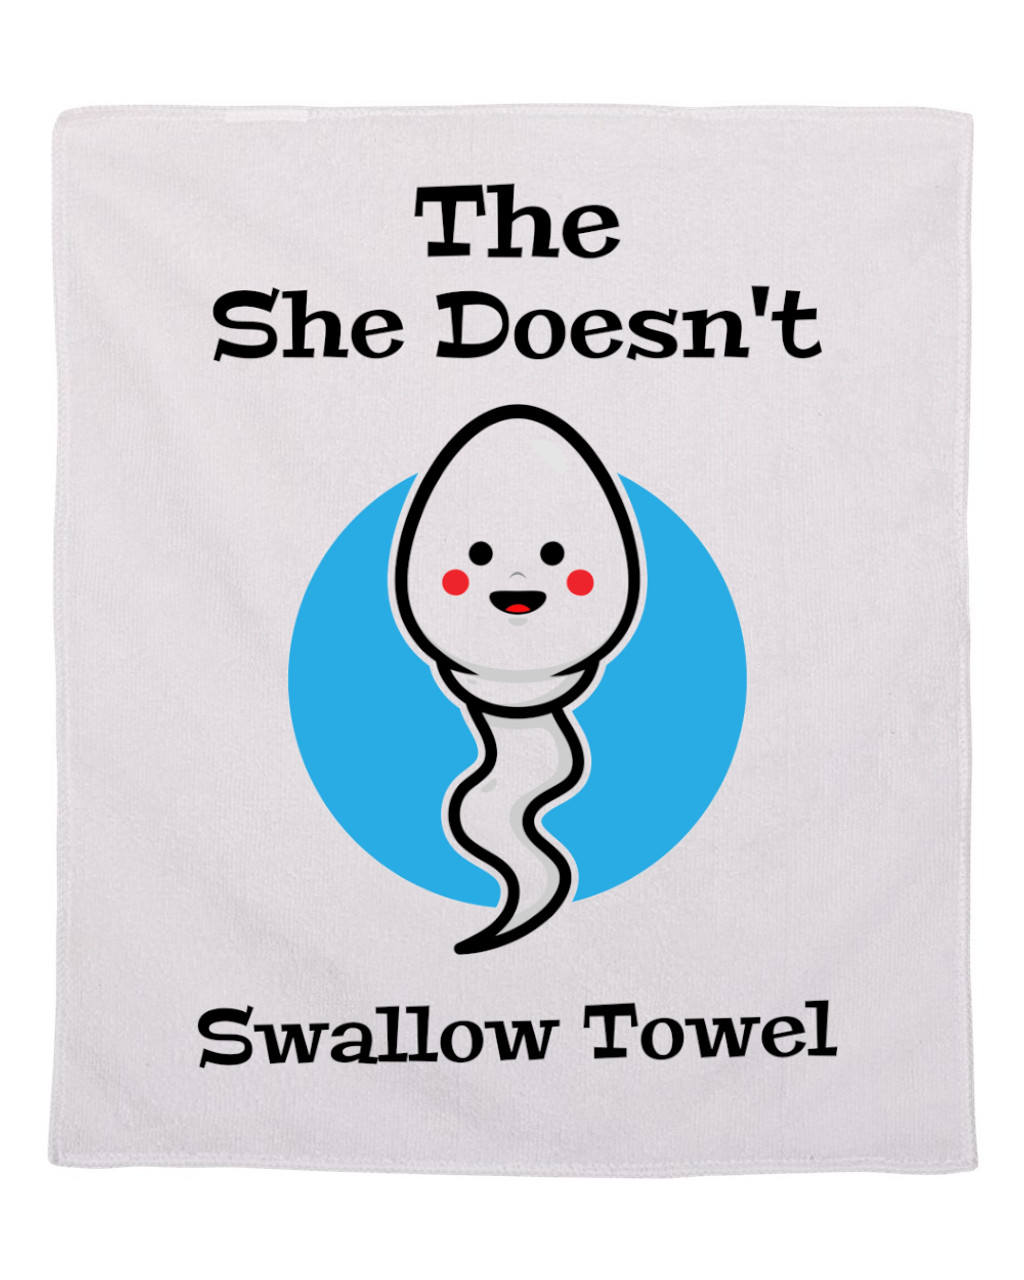 She Doesn't Swallow Cum Rag Sex Towel Funny Wipe Cleanup Cloth 11x18 inches